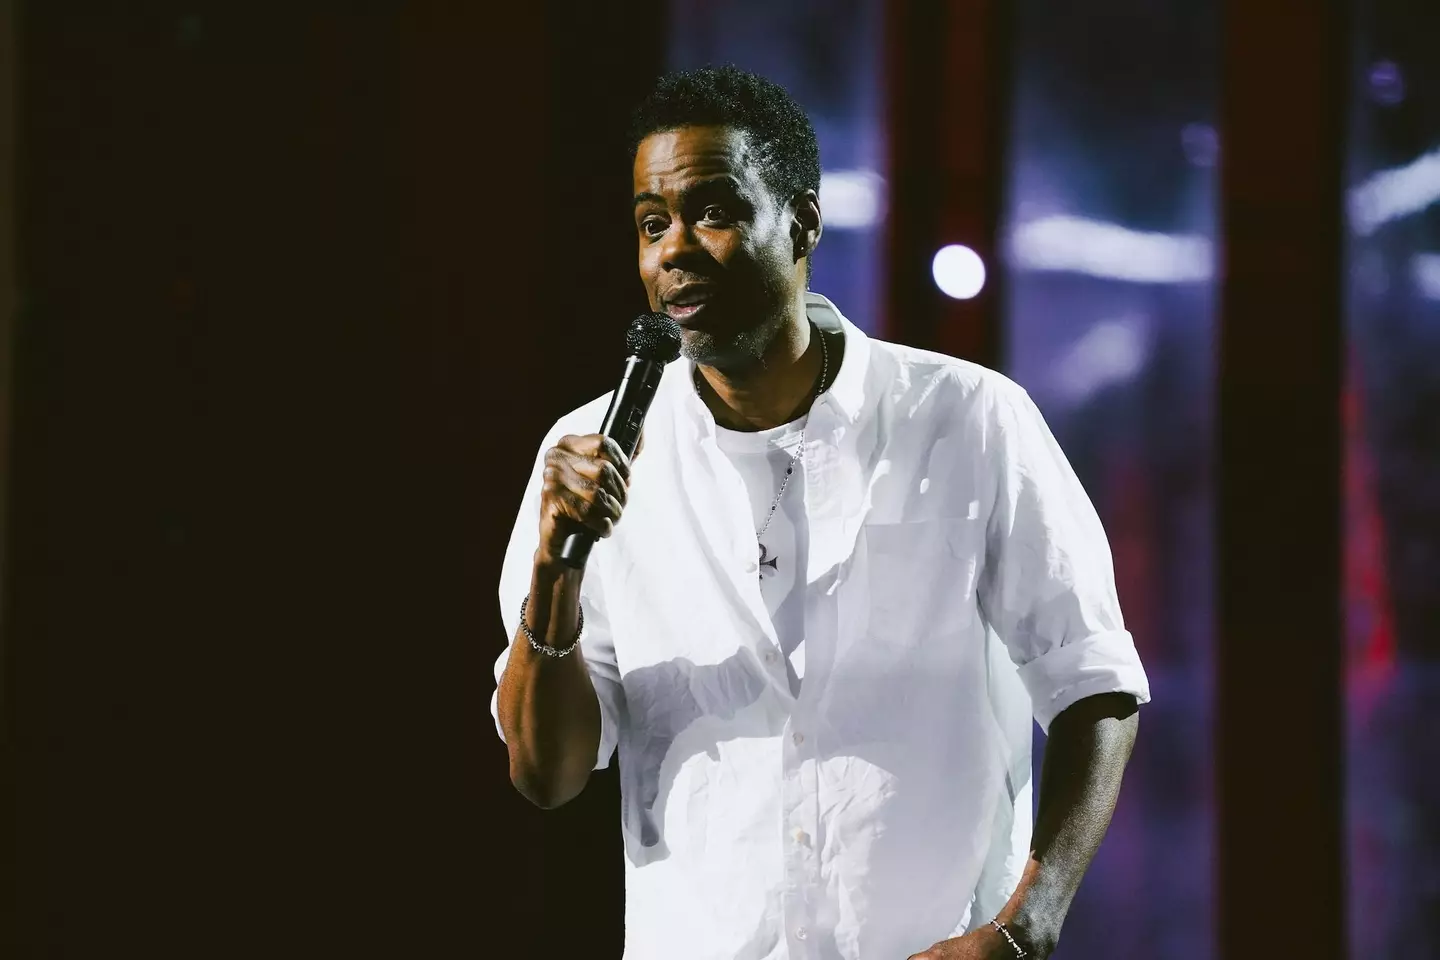 Chris Rock called out Will Smith in his Netflix special this year.